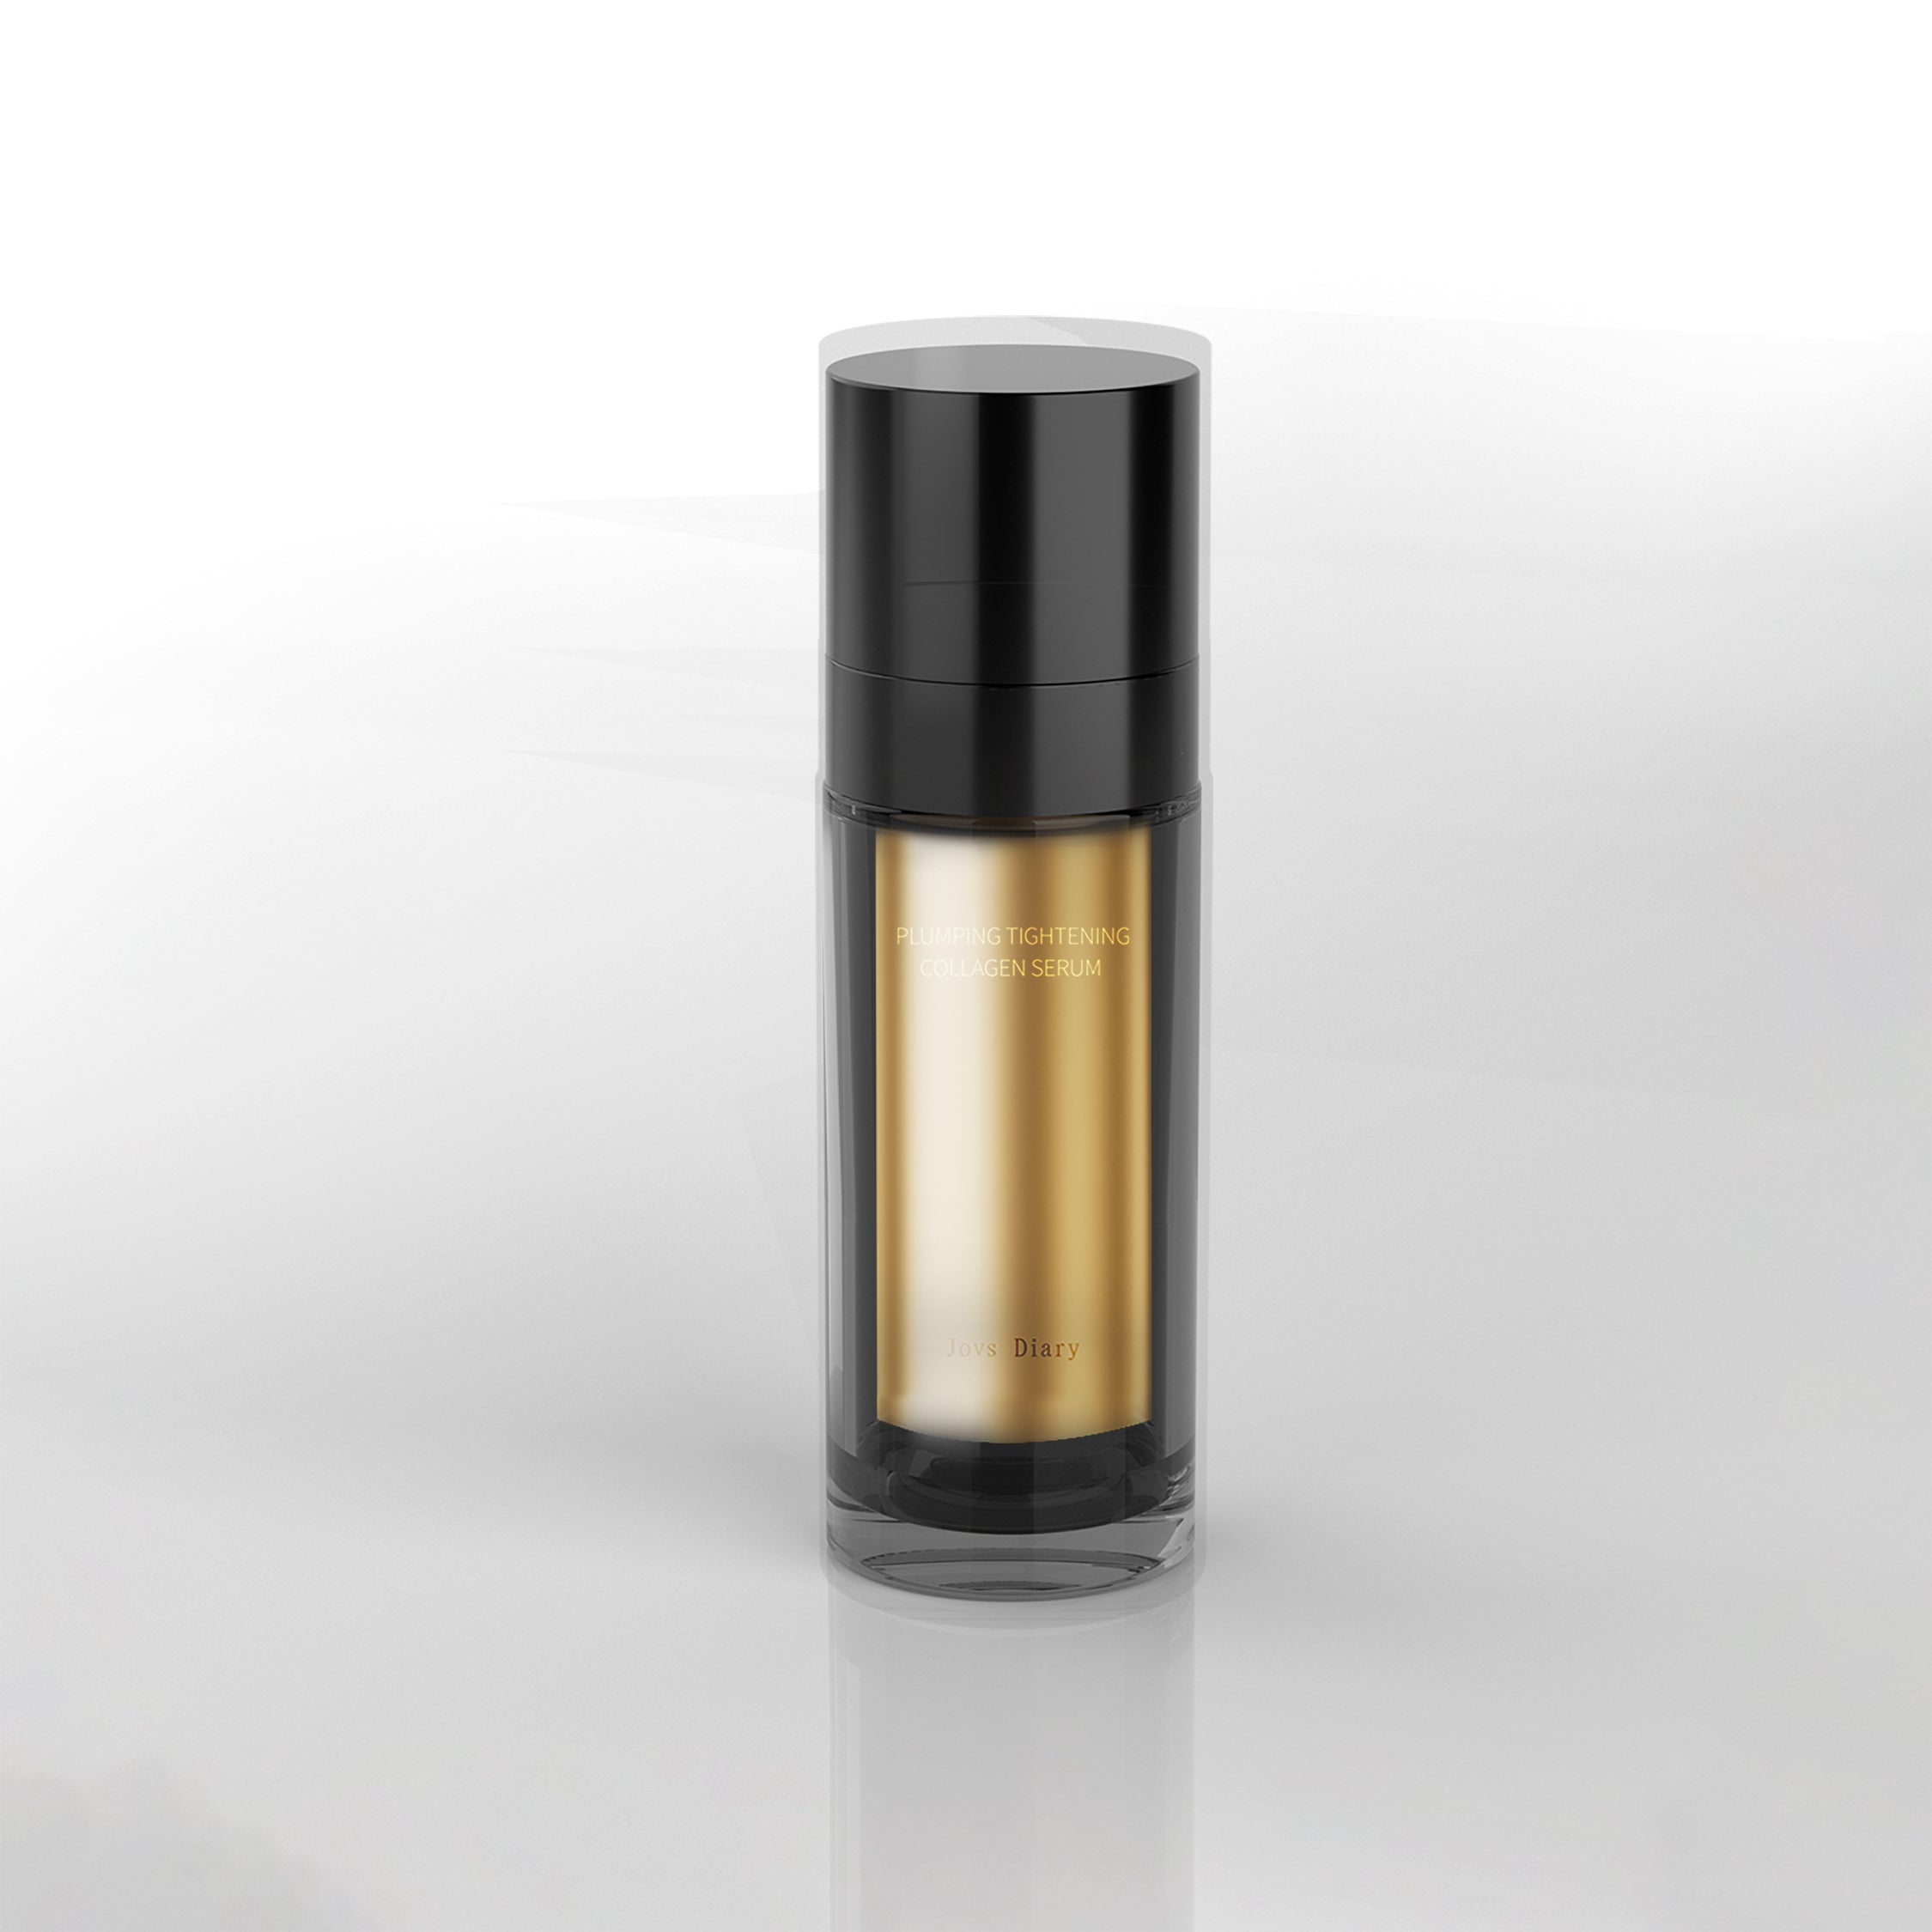 Close-up of JOVS Diary Plumping Tightening Collagen Serum bottle, designed to rejuvenate and firm skin.